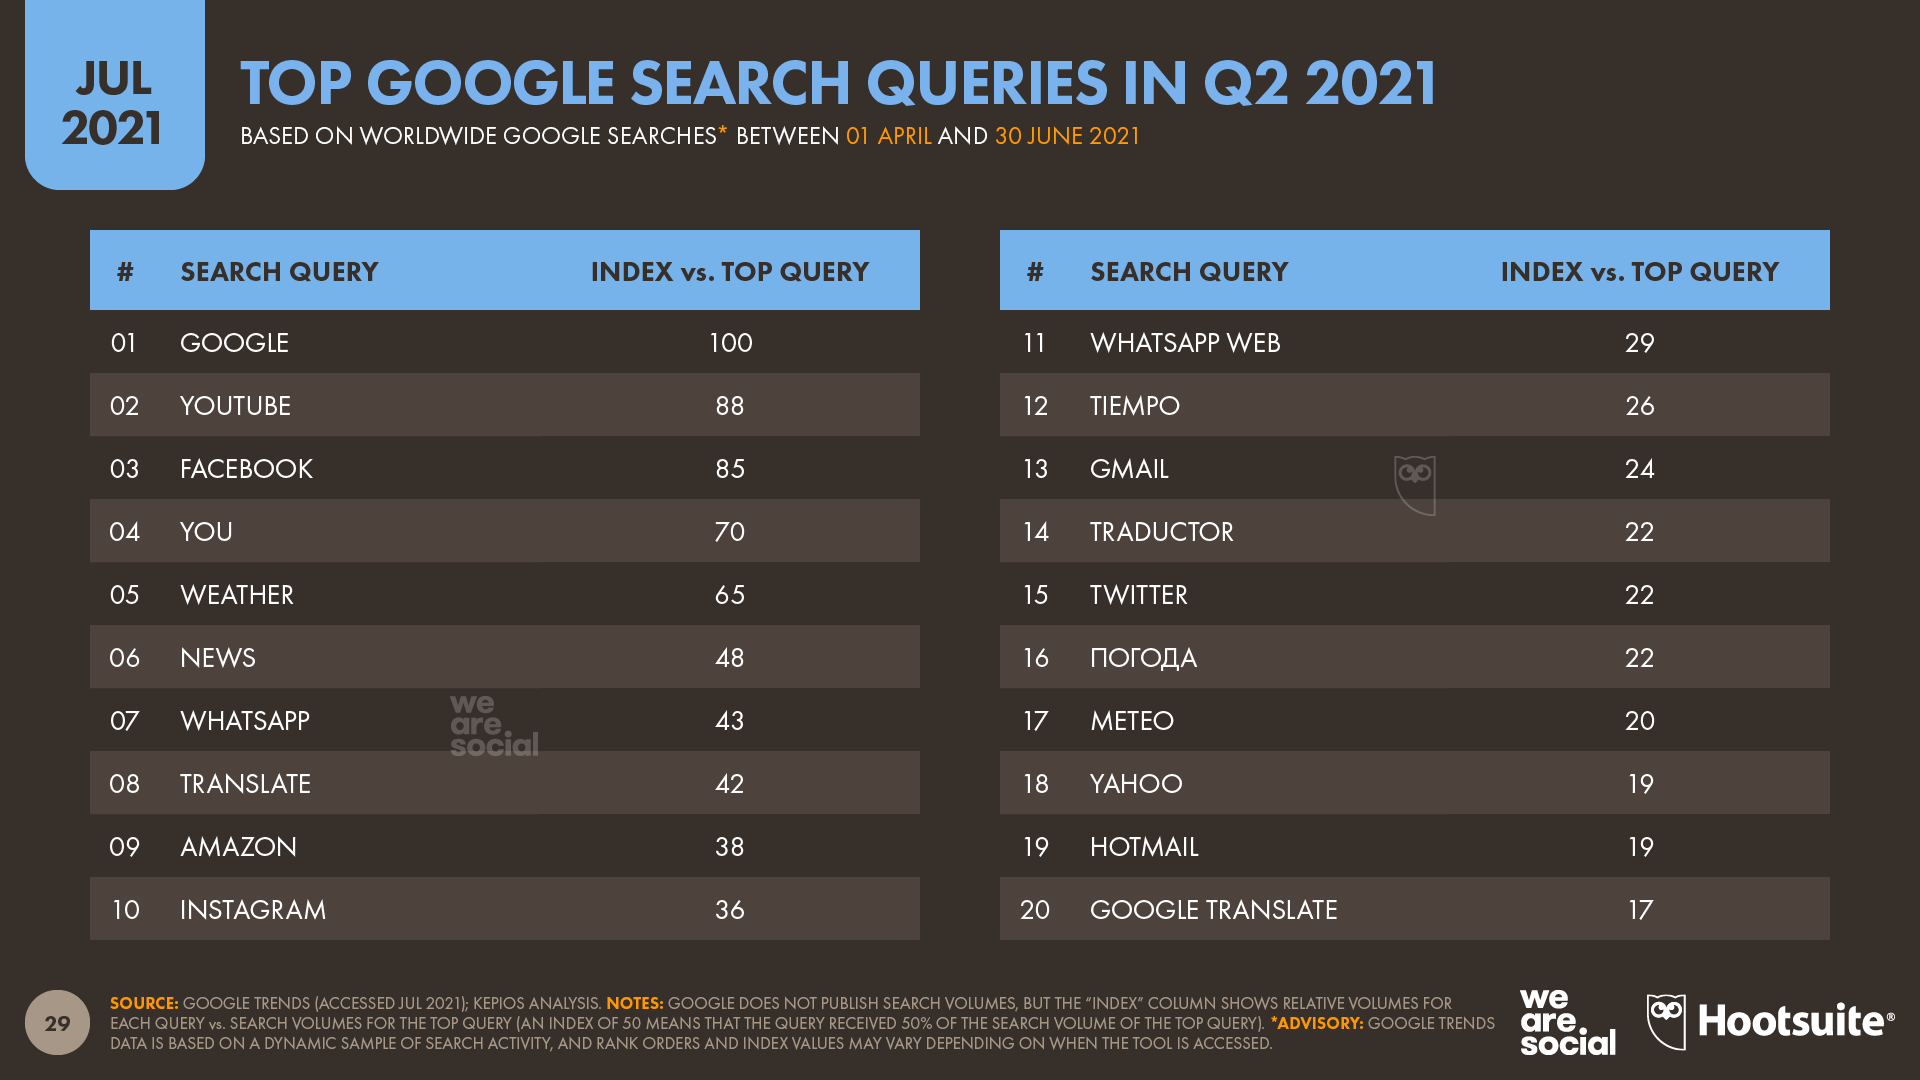 chart showing top Google search queries in Q2 2021